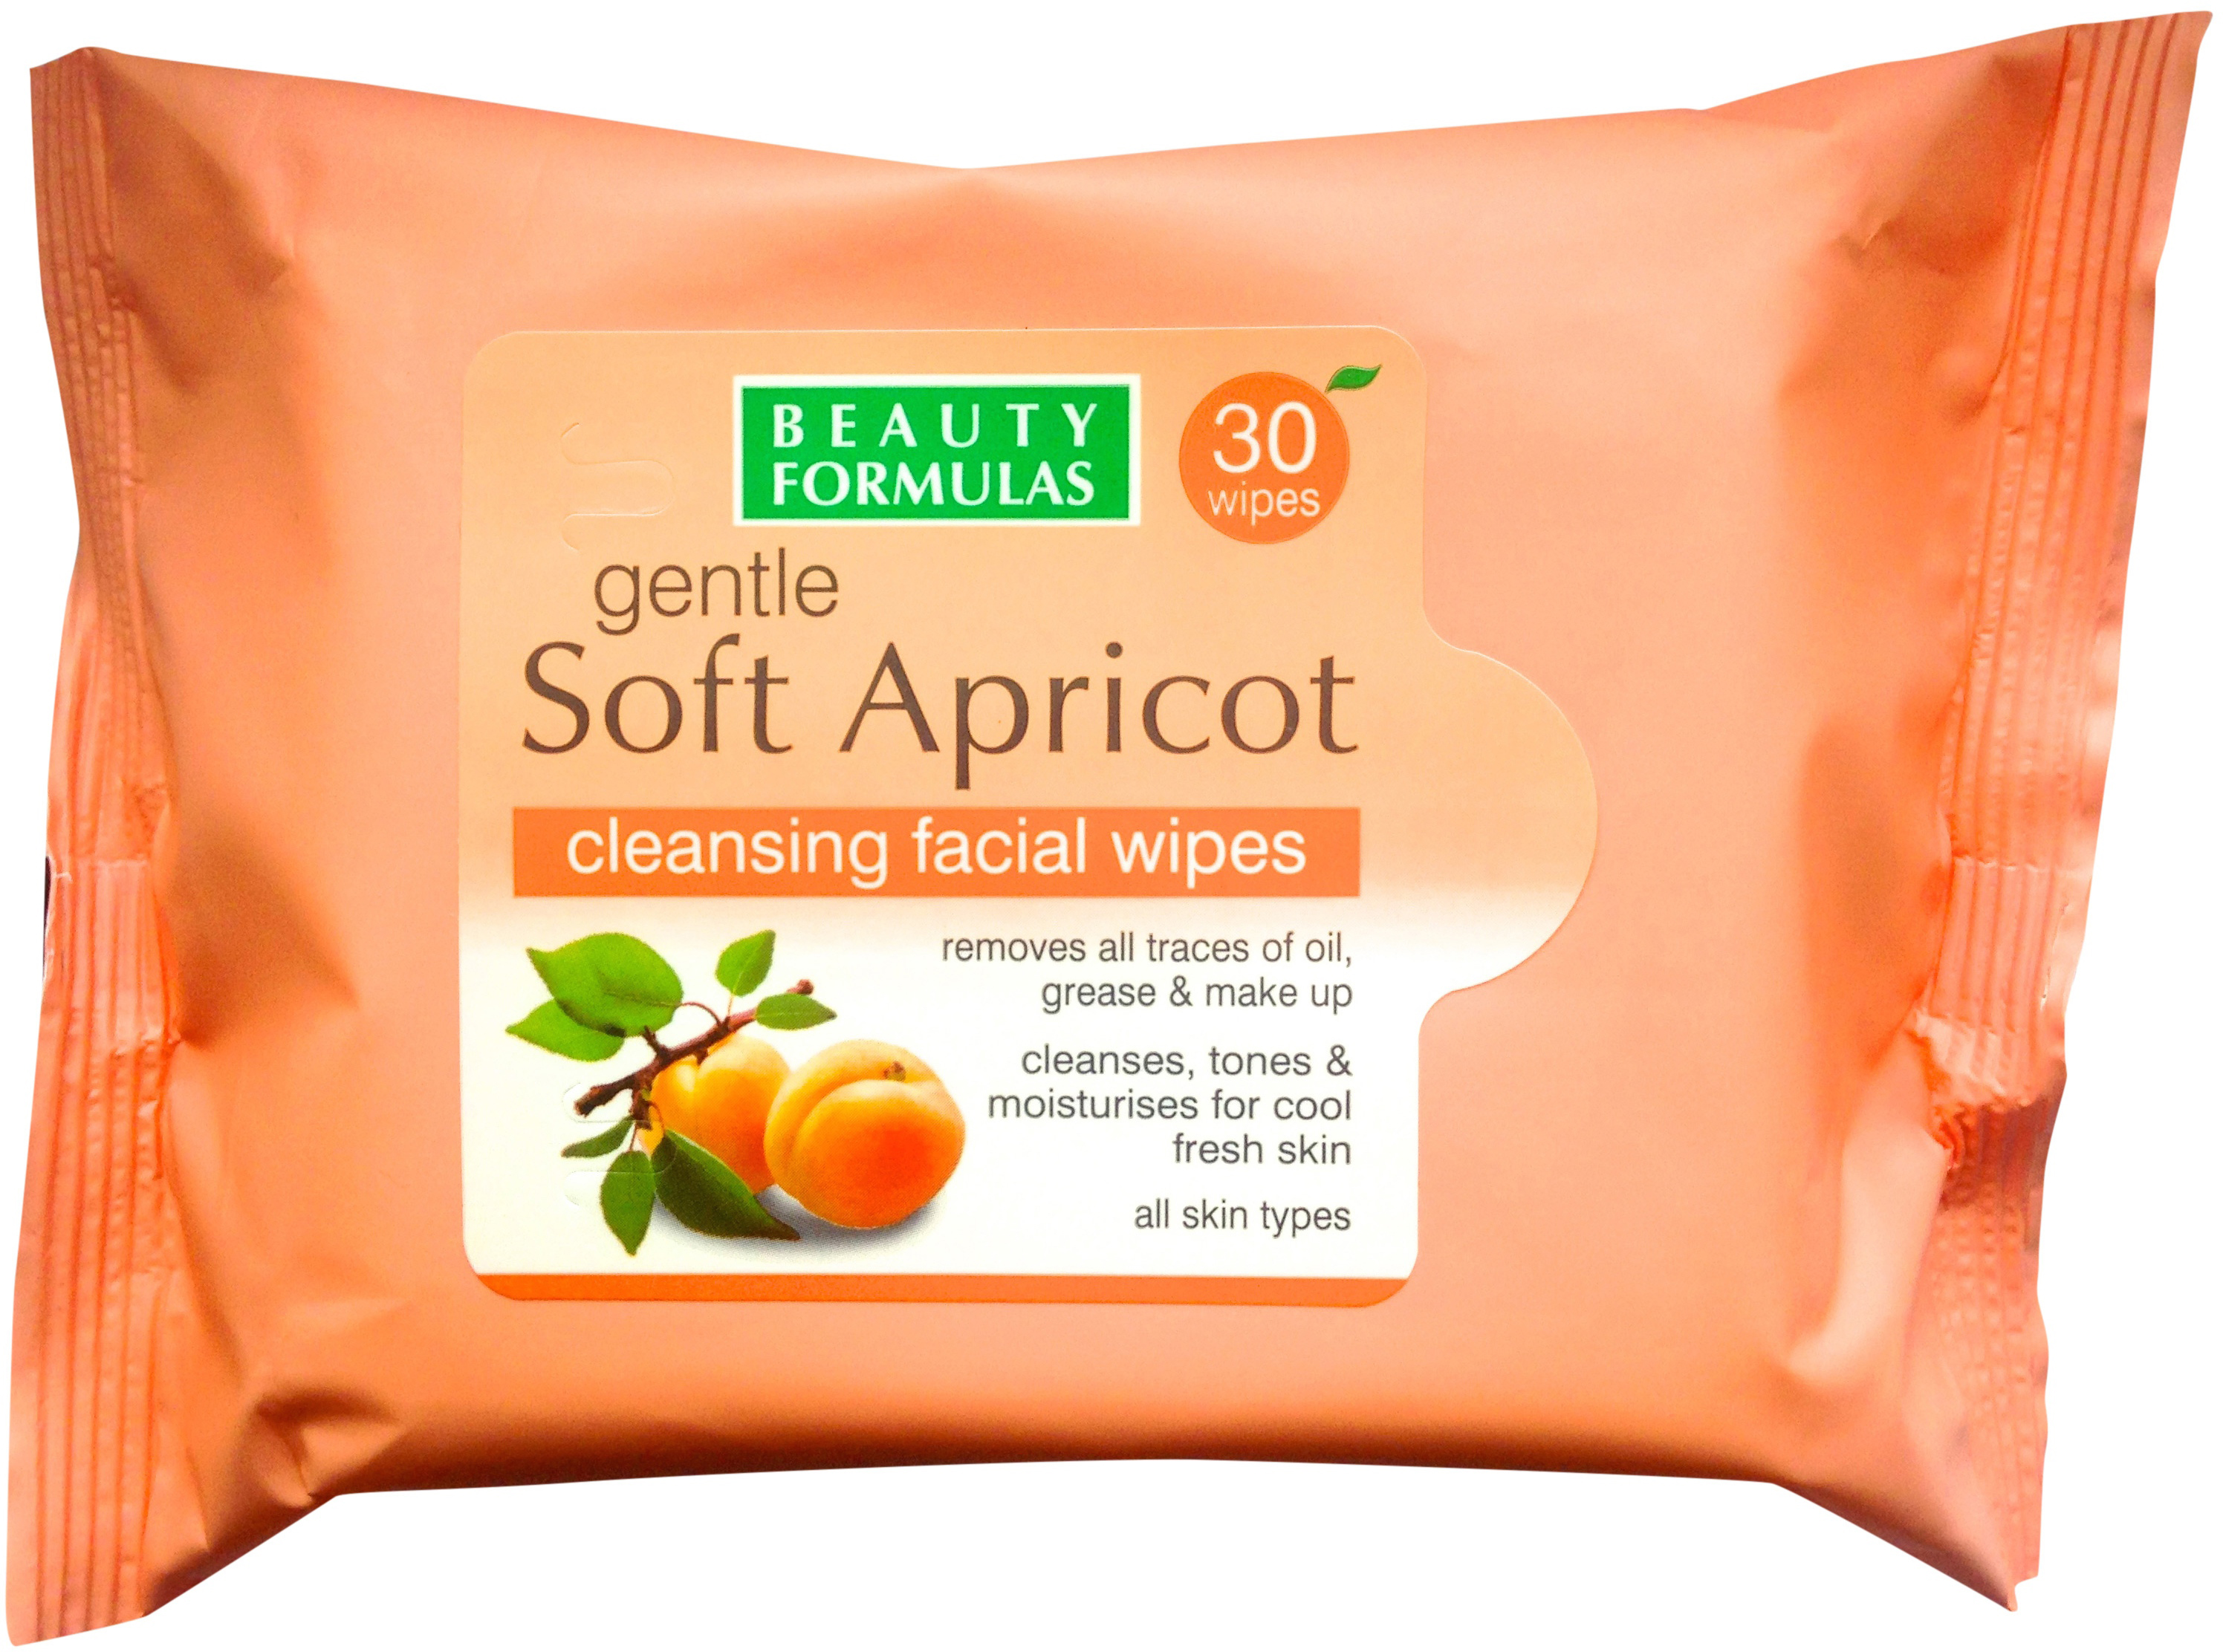 Beauty Formulas Gentle Soft Apricot Cleansing Facial Wipes